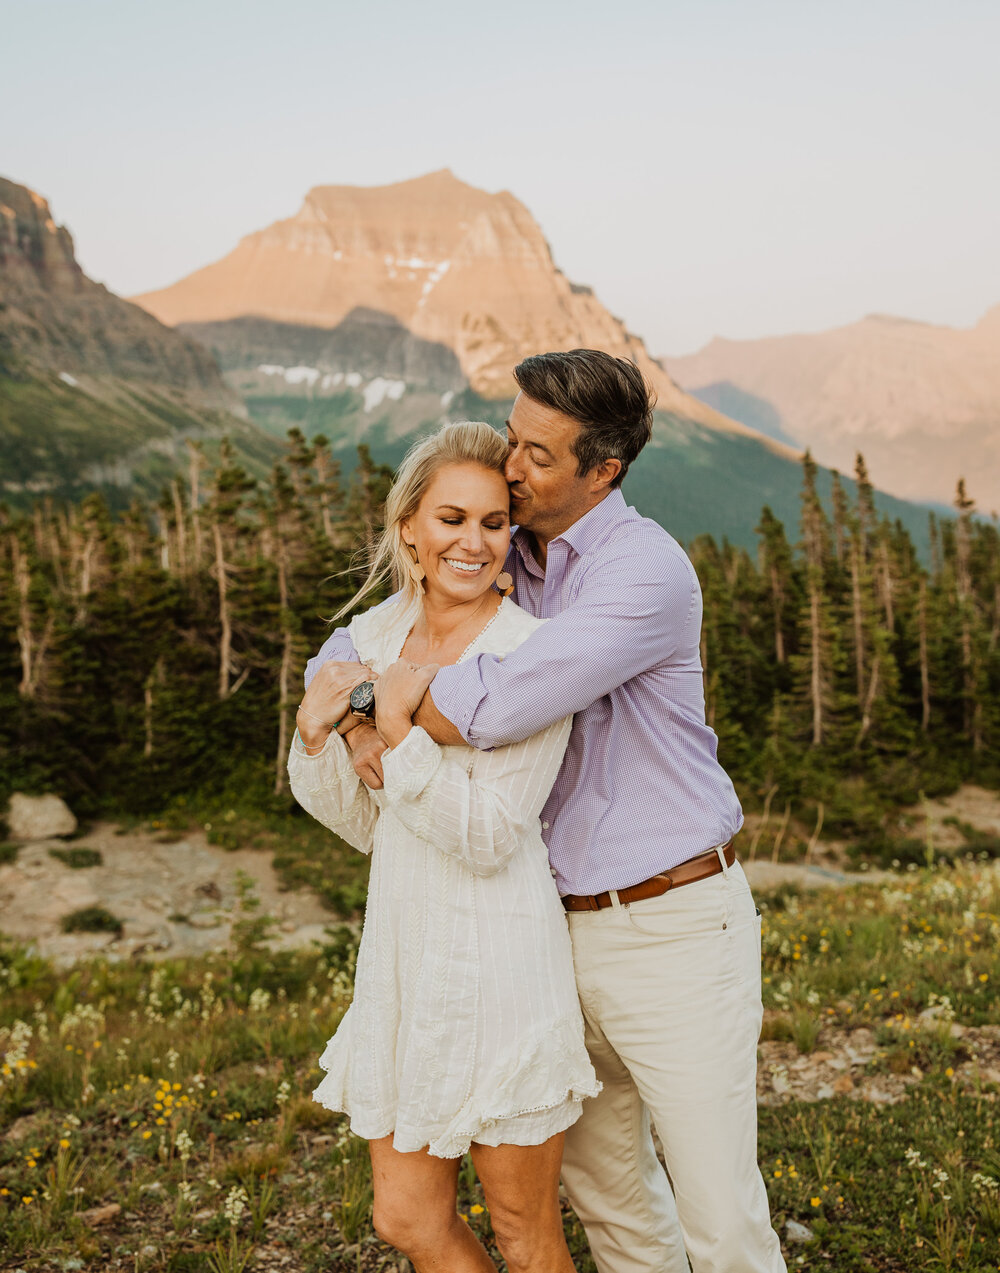 Get married in glacier national park - elopement photo inspo bride and groom